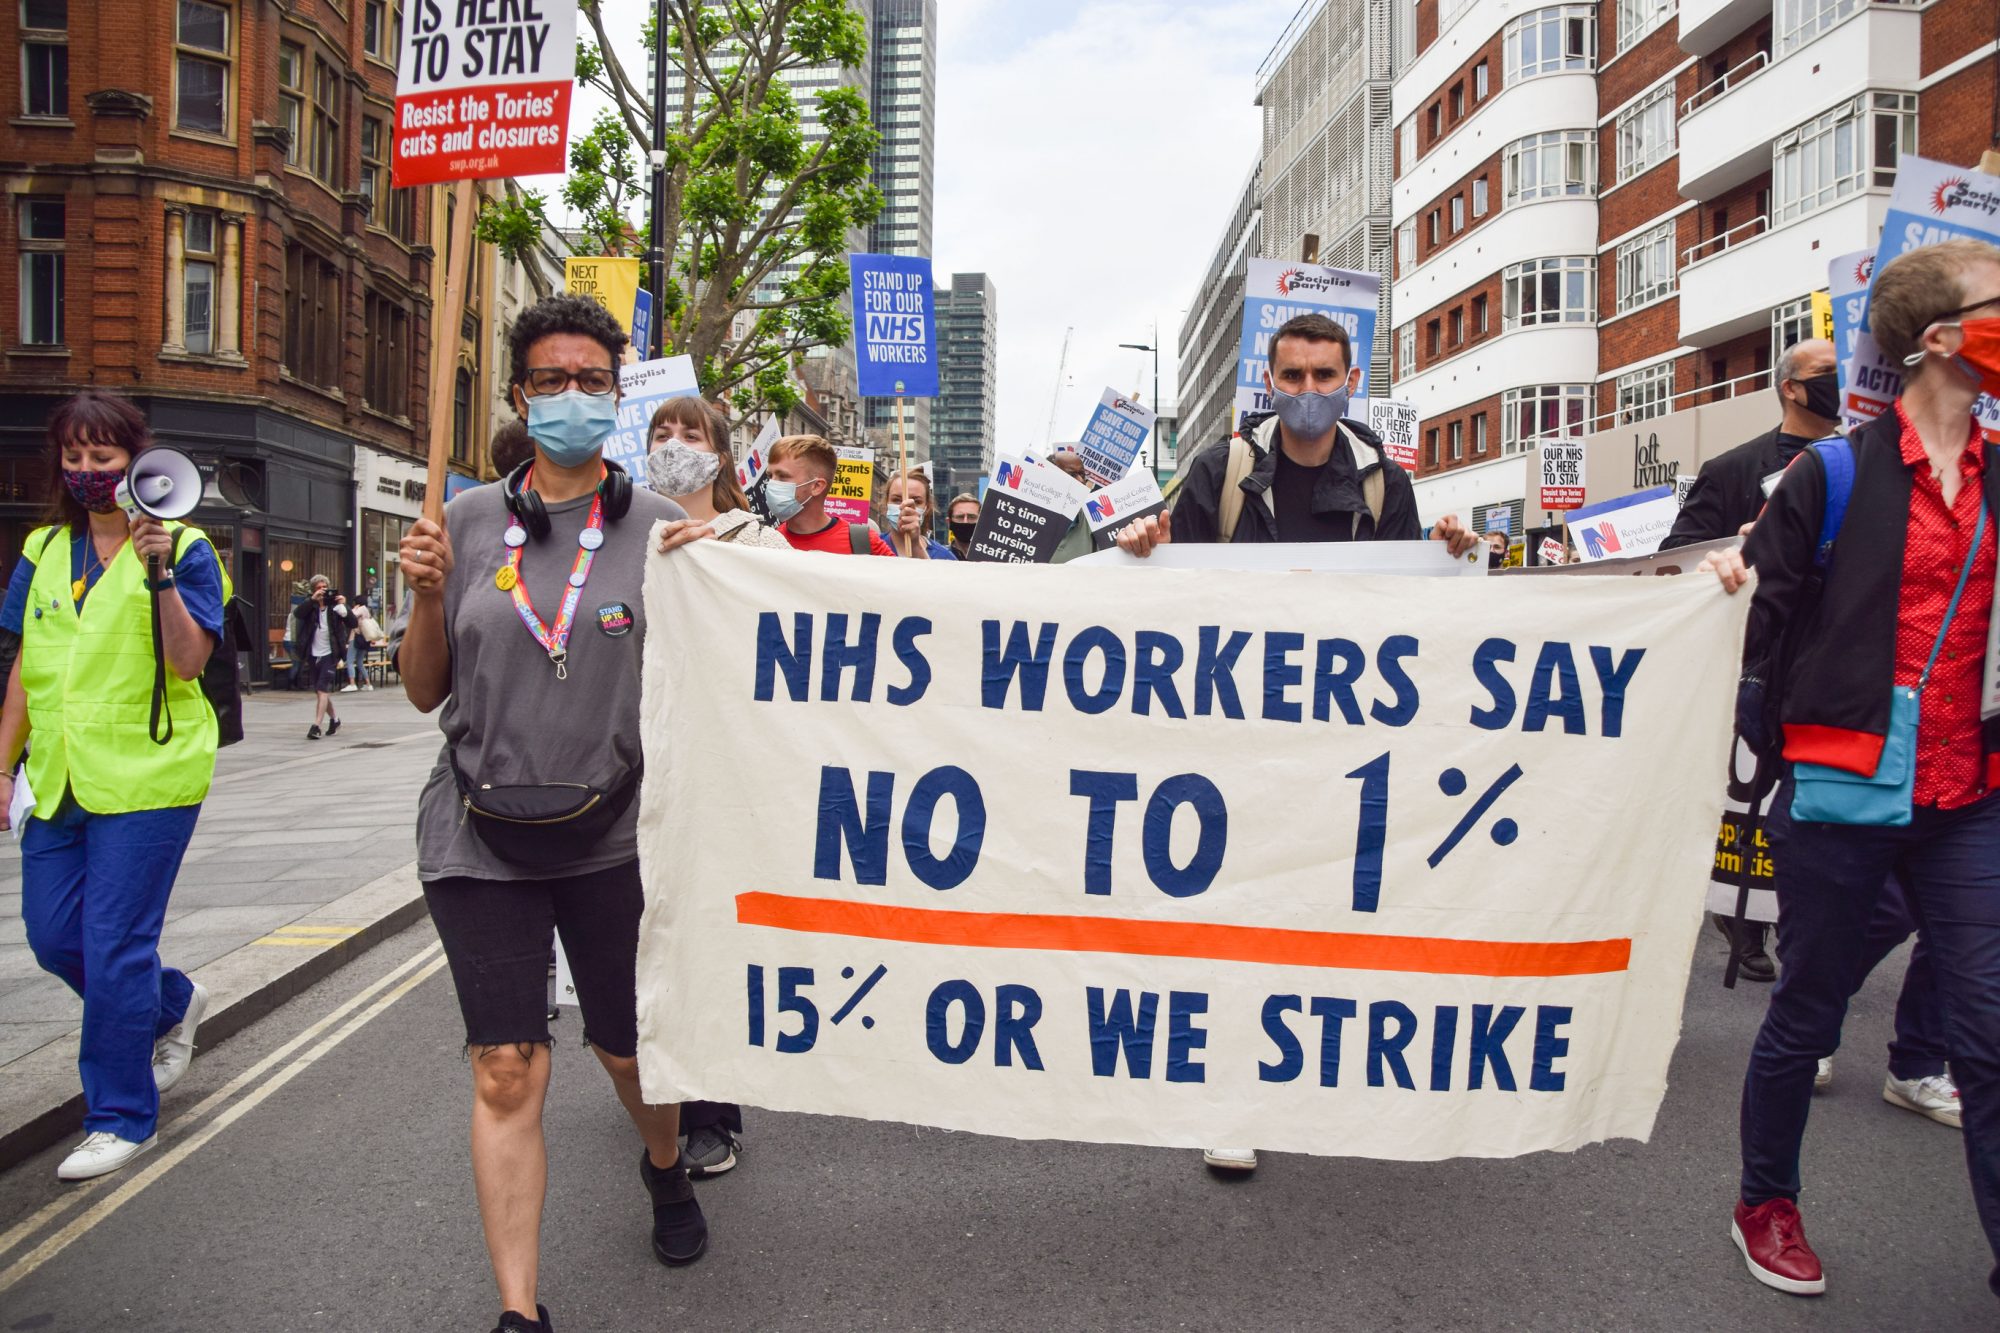 NHS staff protest threatening strike action for fair pay, 3 July 2021, London, UK